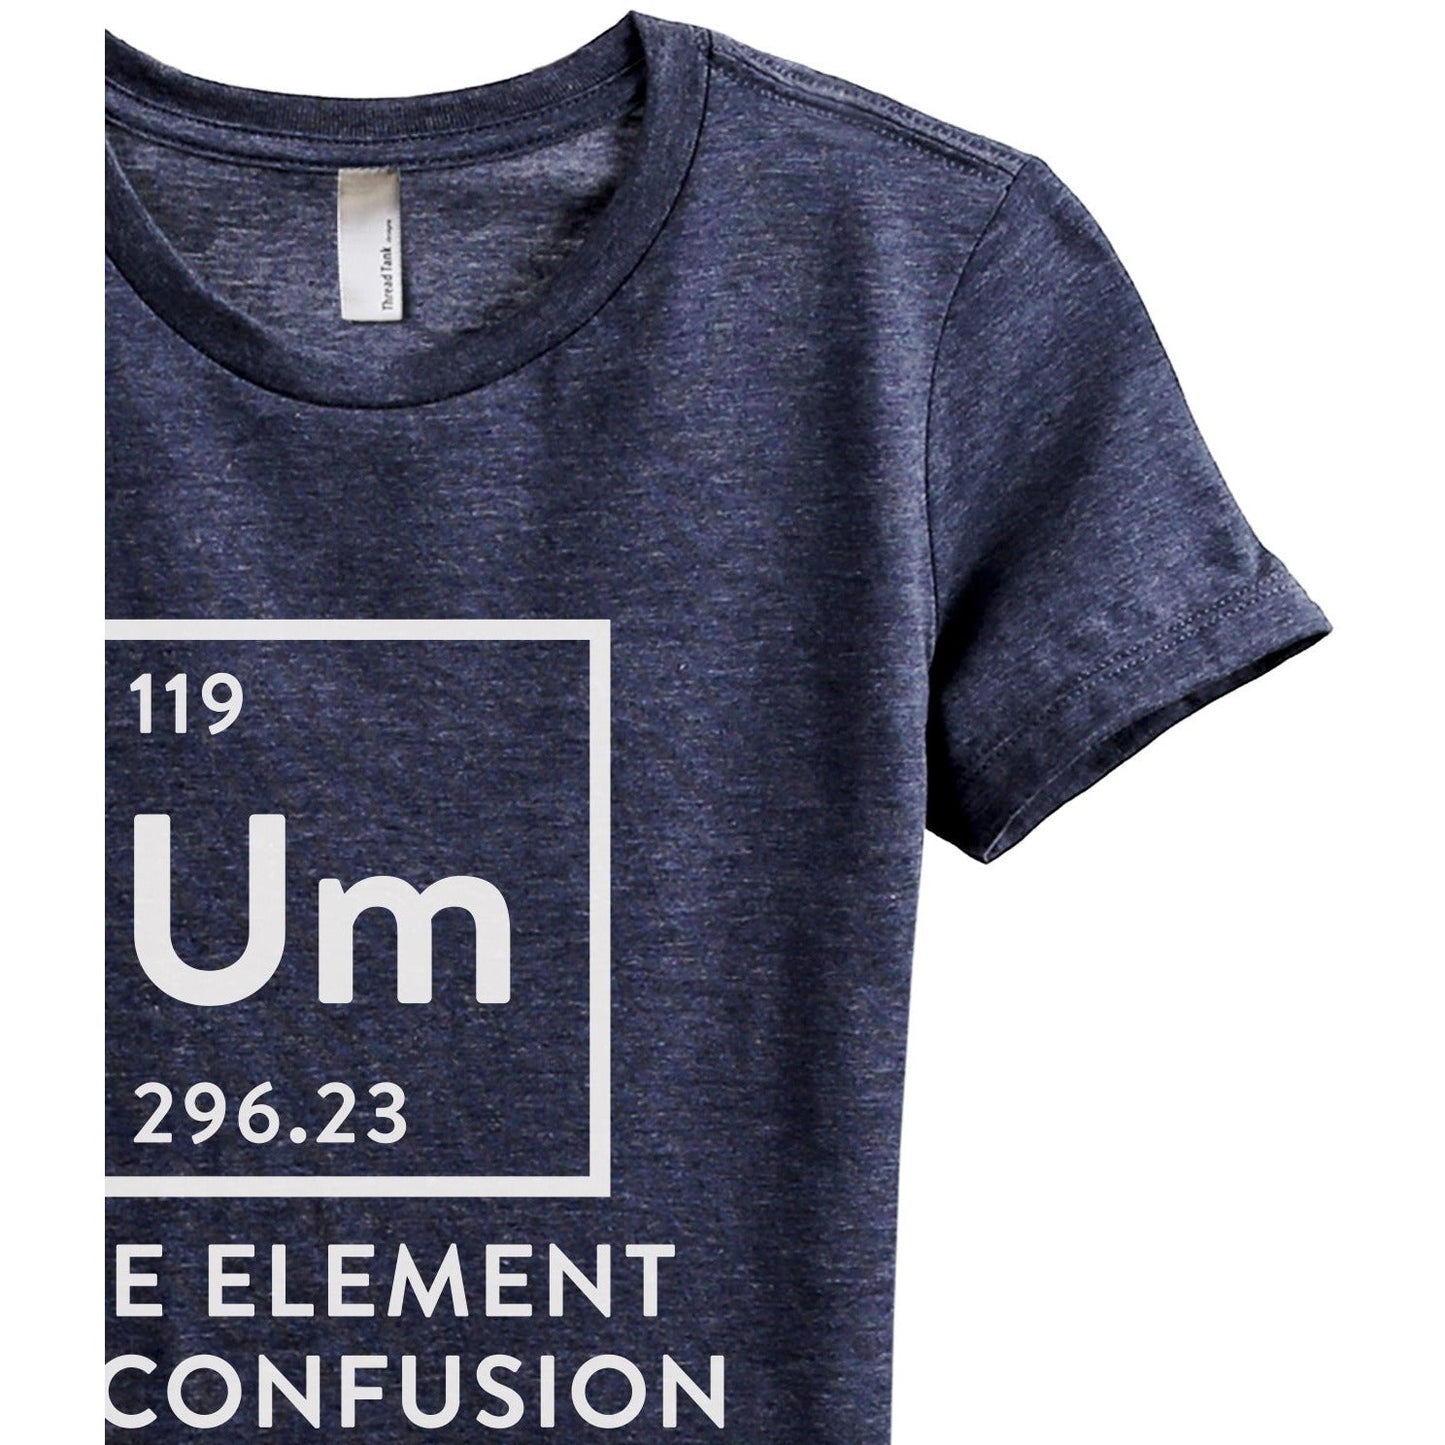 Um Element Of Confusion - Stories You Can Wear